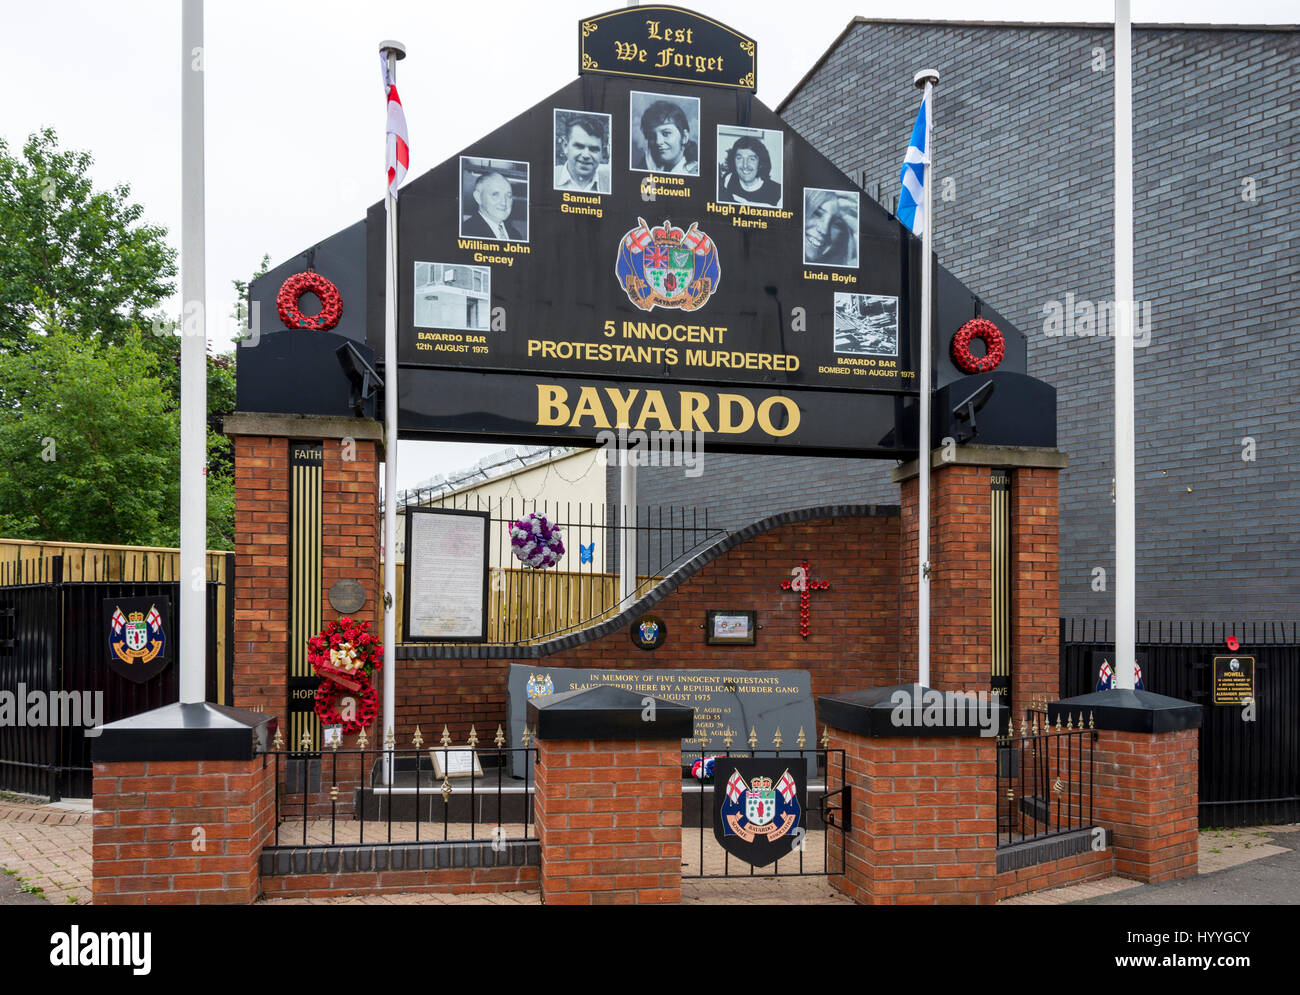 Memorial to the victims, on the site of the bombed Bayardo Bar, Shankill Road, Belfast, County Antrim, Northern Ireland, UK Stock Photo